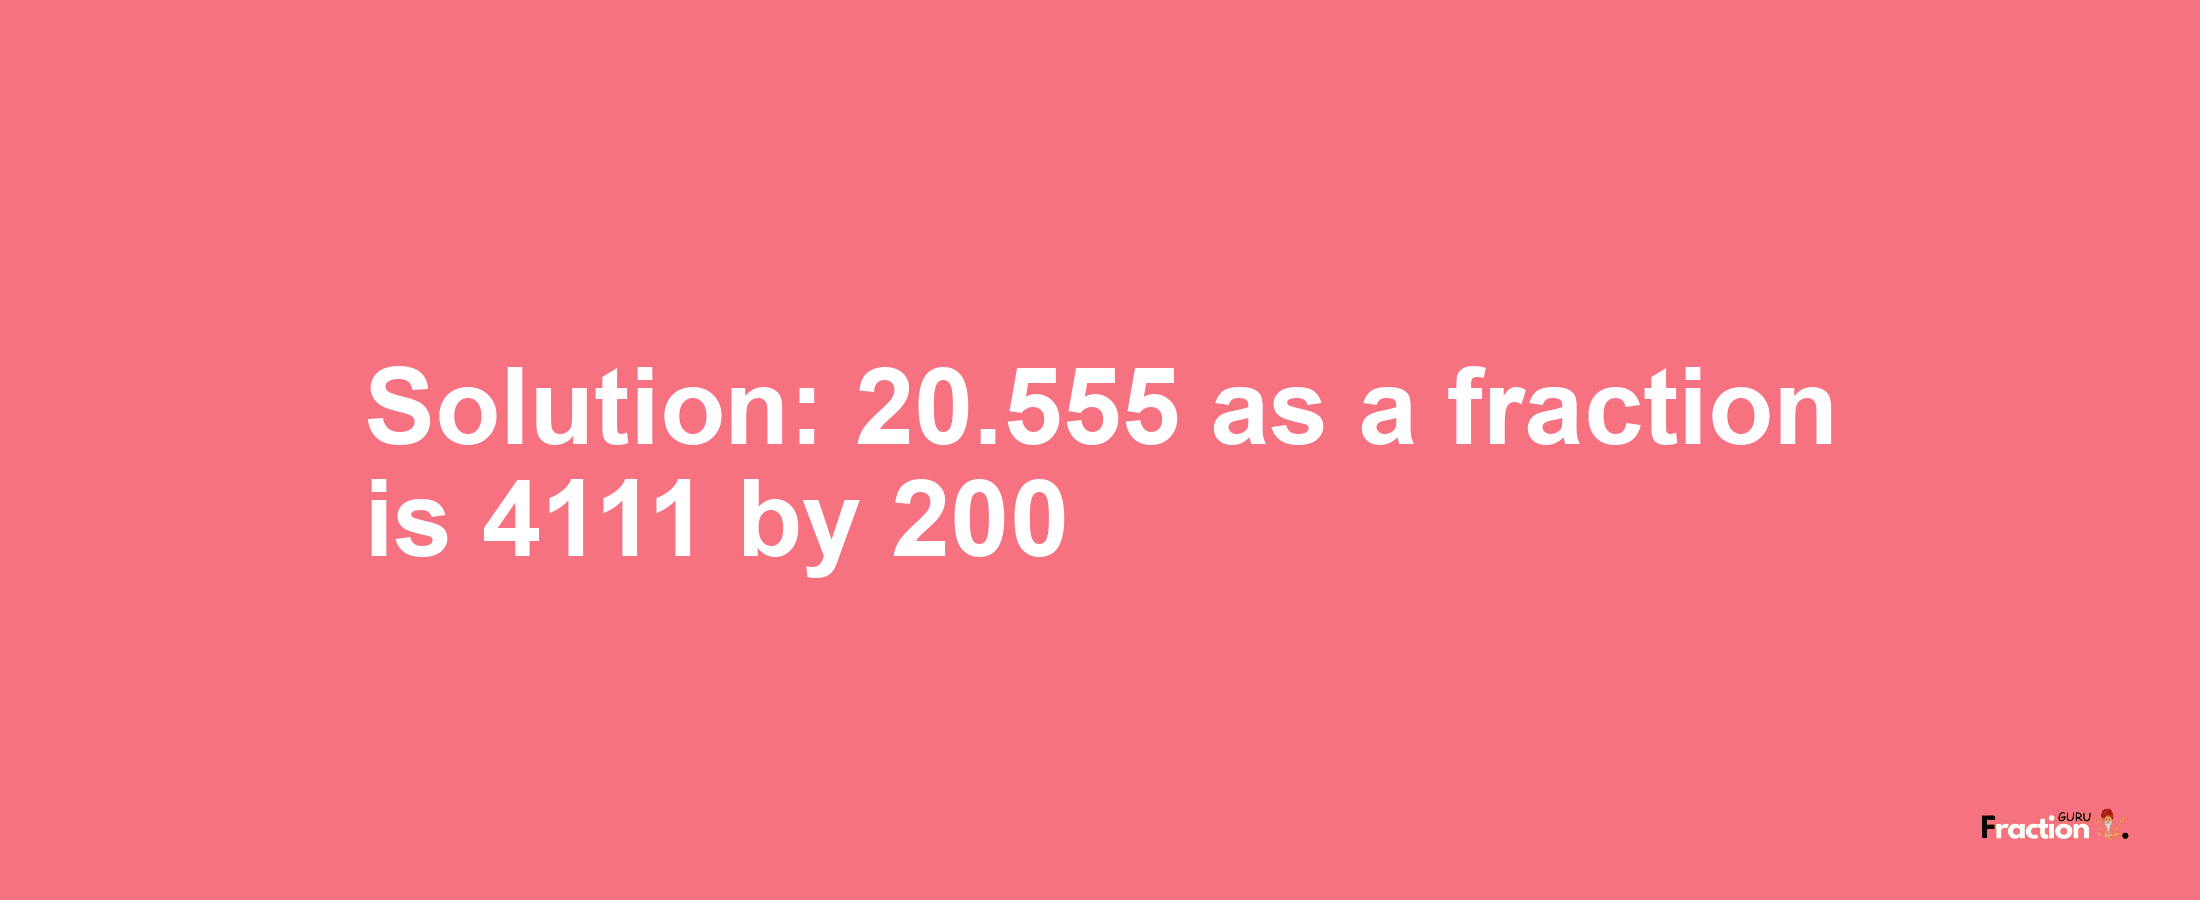 Solution:20.555 as a fraction is 4111/200